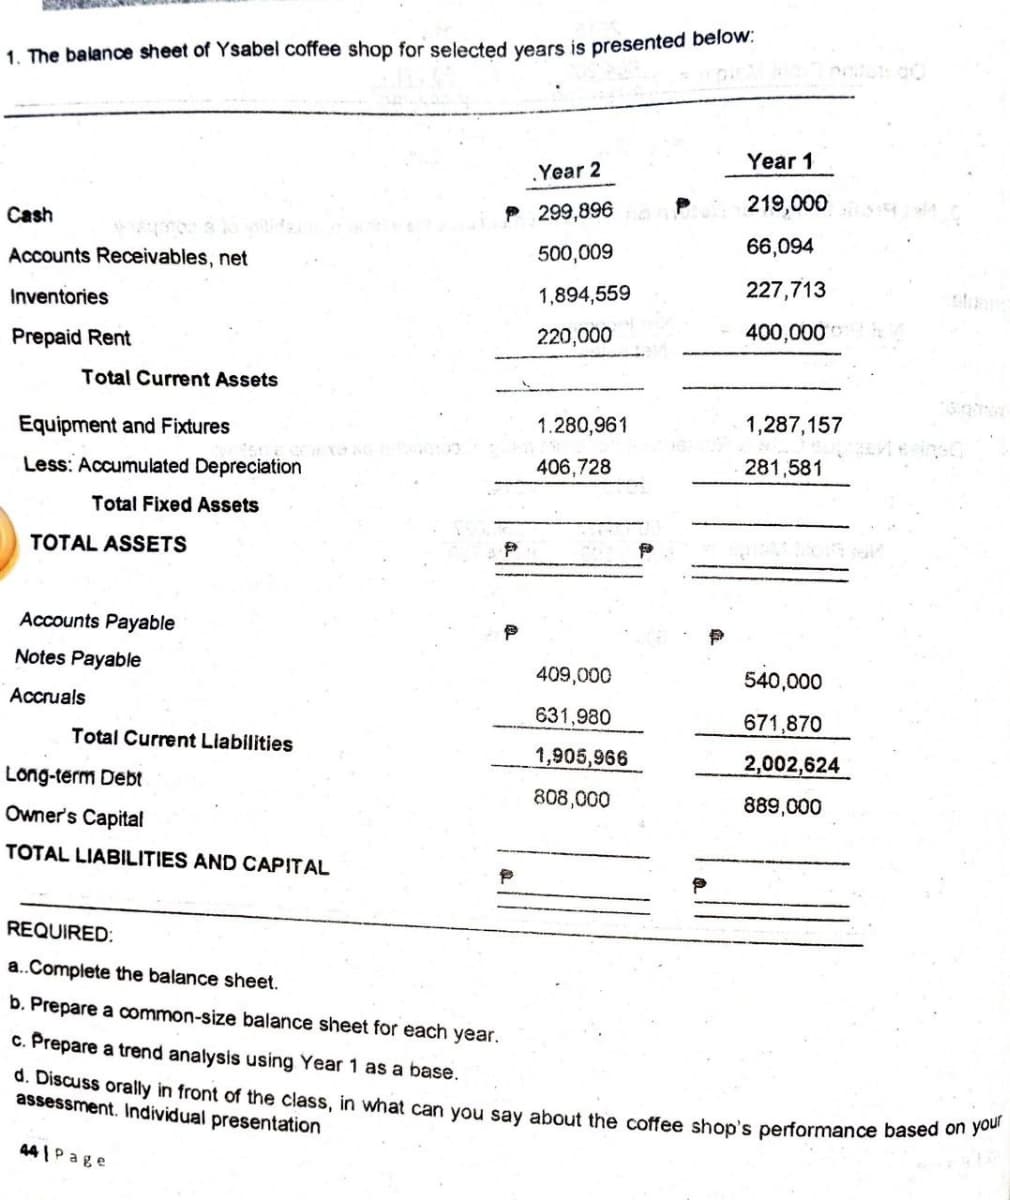 1. The balance sheet of Ysabel coffee shop for selected years is presented below:
Cash
Accounts Receivables, net
Inventories
Prepaid Rent
Total Current Assets
Equipment and Fixtures
Less: Accumulated Depreciation
Total Fixed Assets
TOTAL ASSETS
Accounts Payable
Notes Payable
Accruals
Total Current Liabilities
Long-term Debt
Owner's Capital
TOTAL LIABILITIES AND CAPITAL
.Year 2
299,896 ?
500,009
44 Page
1,894,559
220,000
1.280,961
406,728
409,000
631,980
1,905,966
808,000
Year 1
219,000 aft
66,094
227,713
400,000
1,287,157
281,581
gibt sich seat
540,000
671,870
2,002,624
889,000
REQUIRED:
a..Complete the balance sheet.
b. Prepare a common-size balance sheet for each year.
c. Prepare a trend analysis using Year 1 as a base.
d. Discuss orally in front of the class, in what can you say about the coffee shop's performance based on your
assessment. Individual presentation